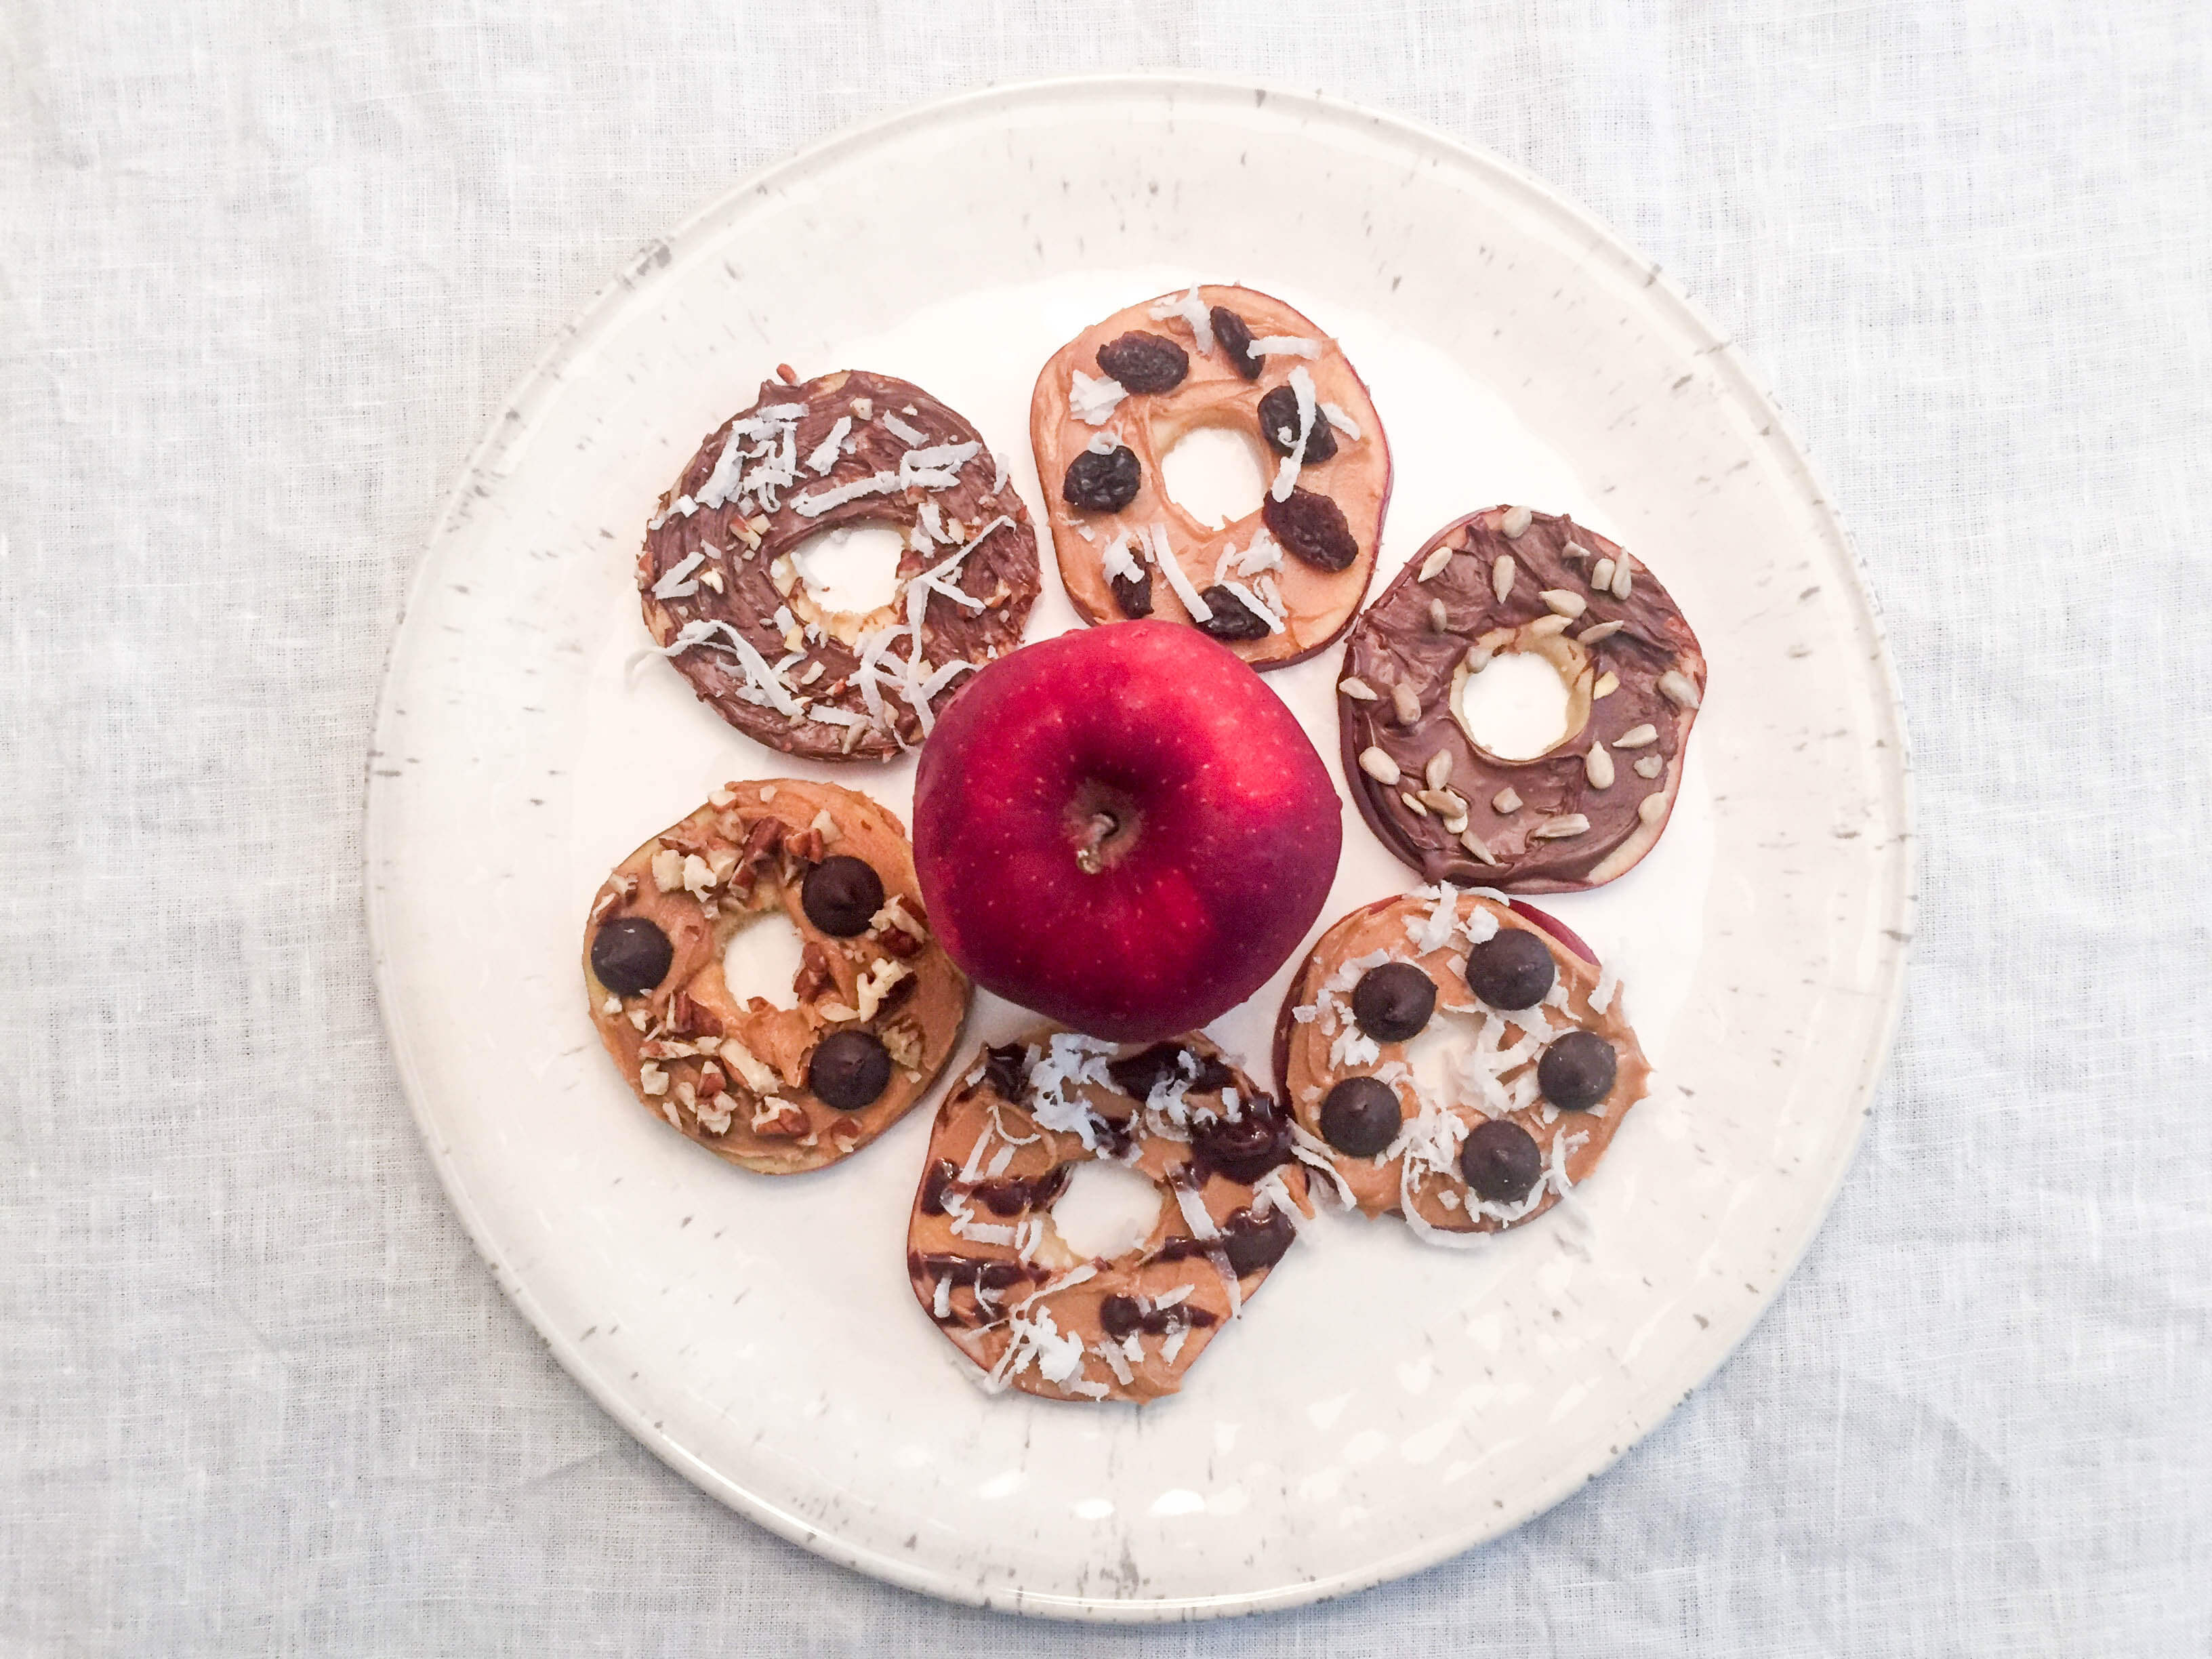 Apple Ring "Cookies" - Easy After-School Snack Ideas 